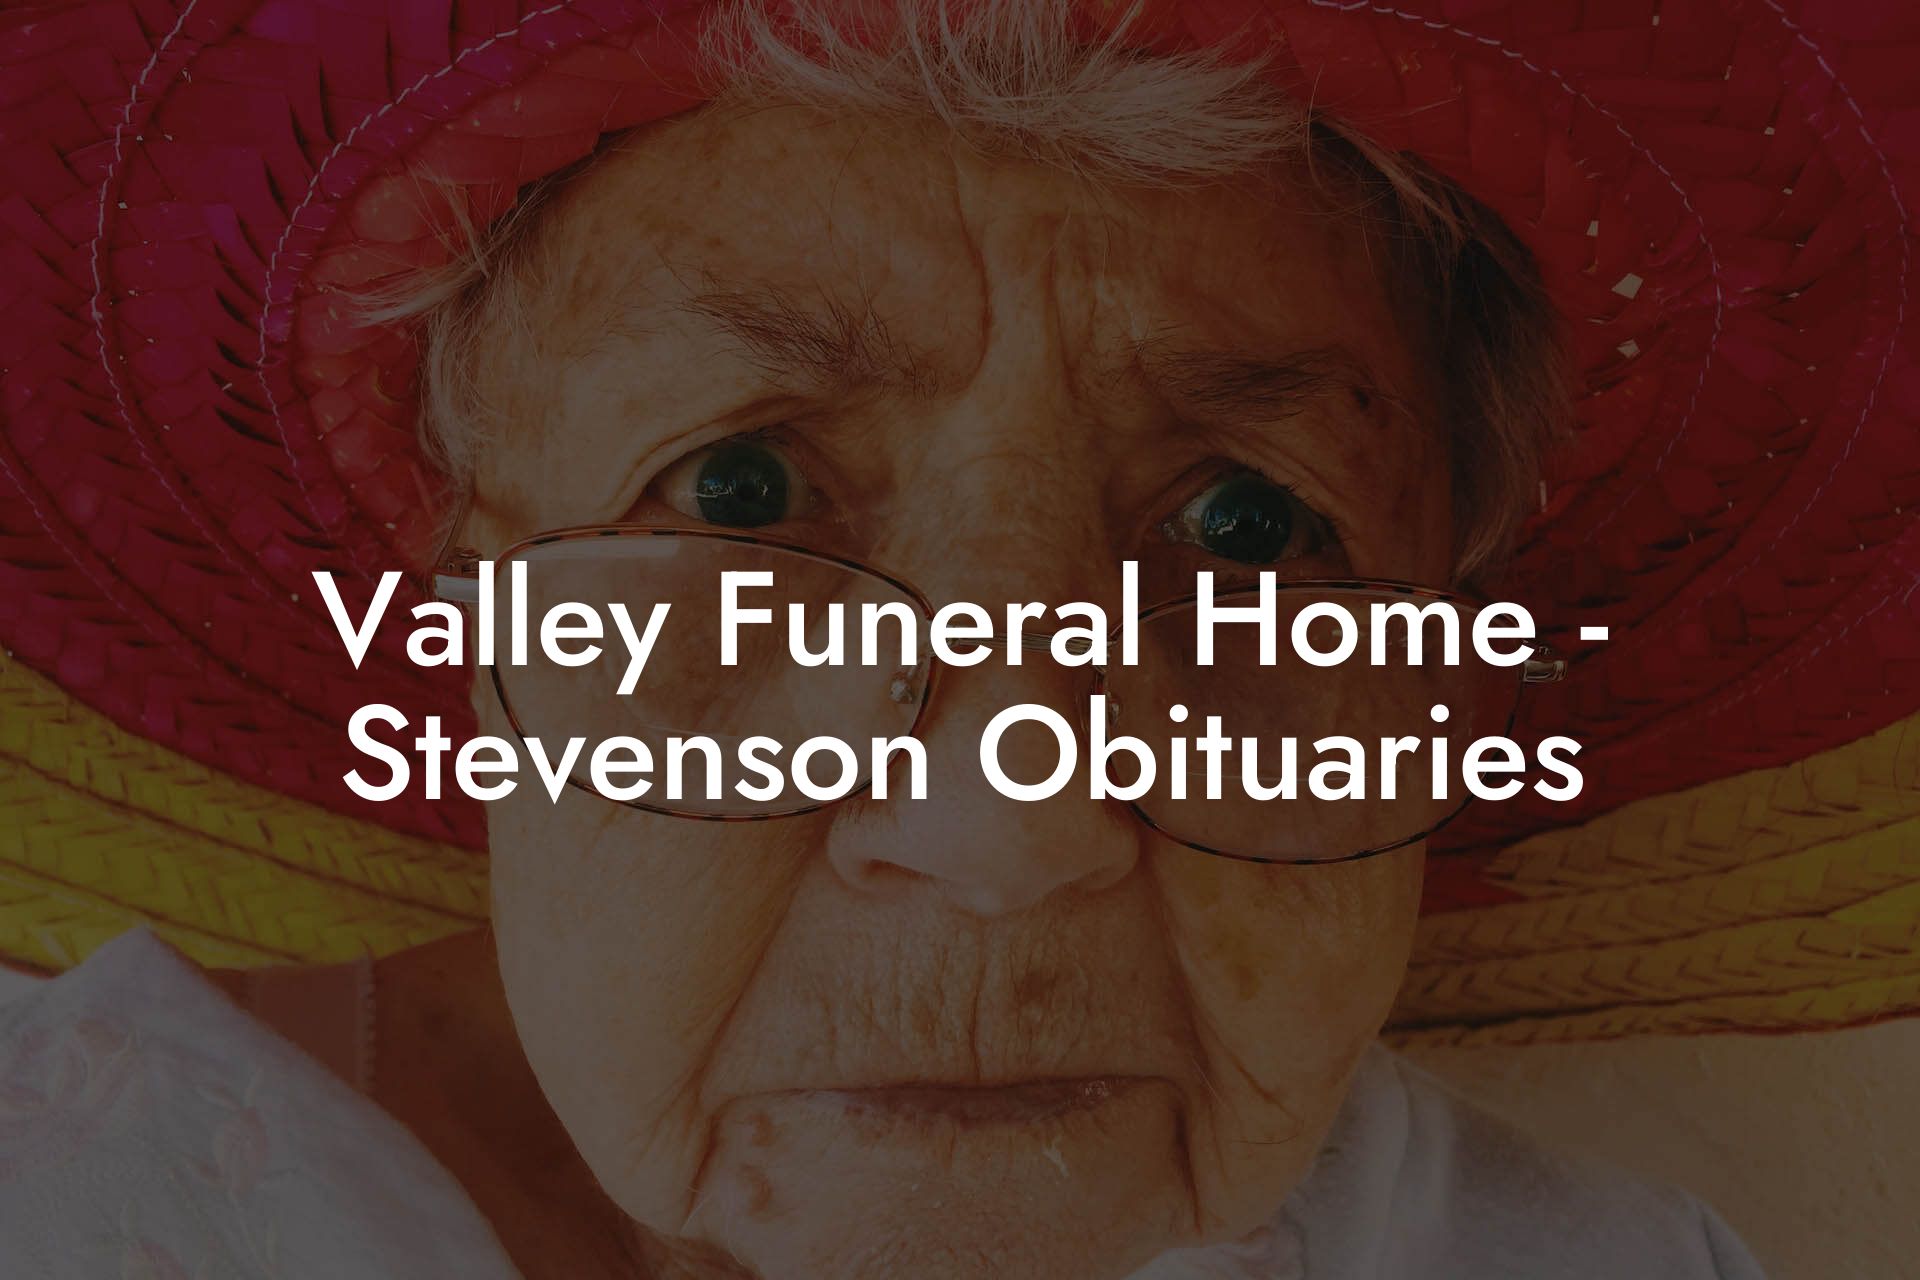 Valley Funeral Home - Stevenson Obituaries